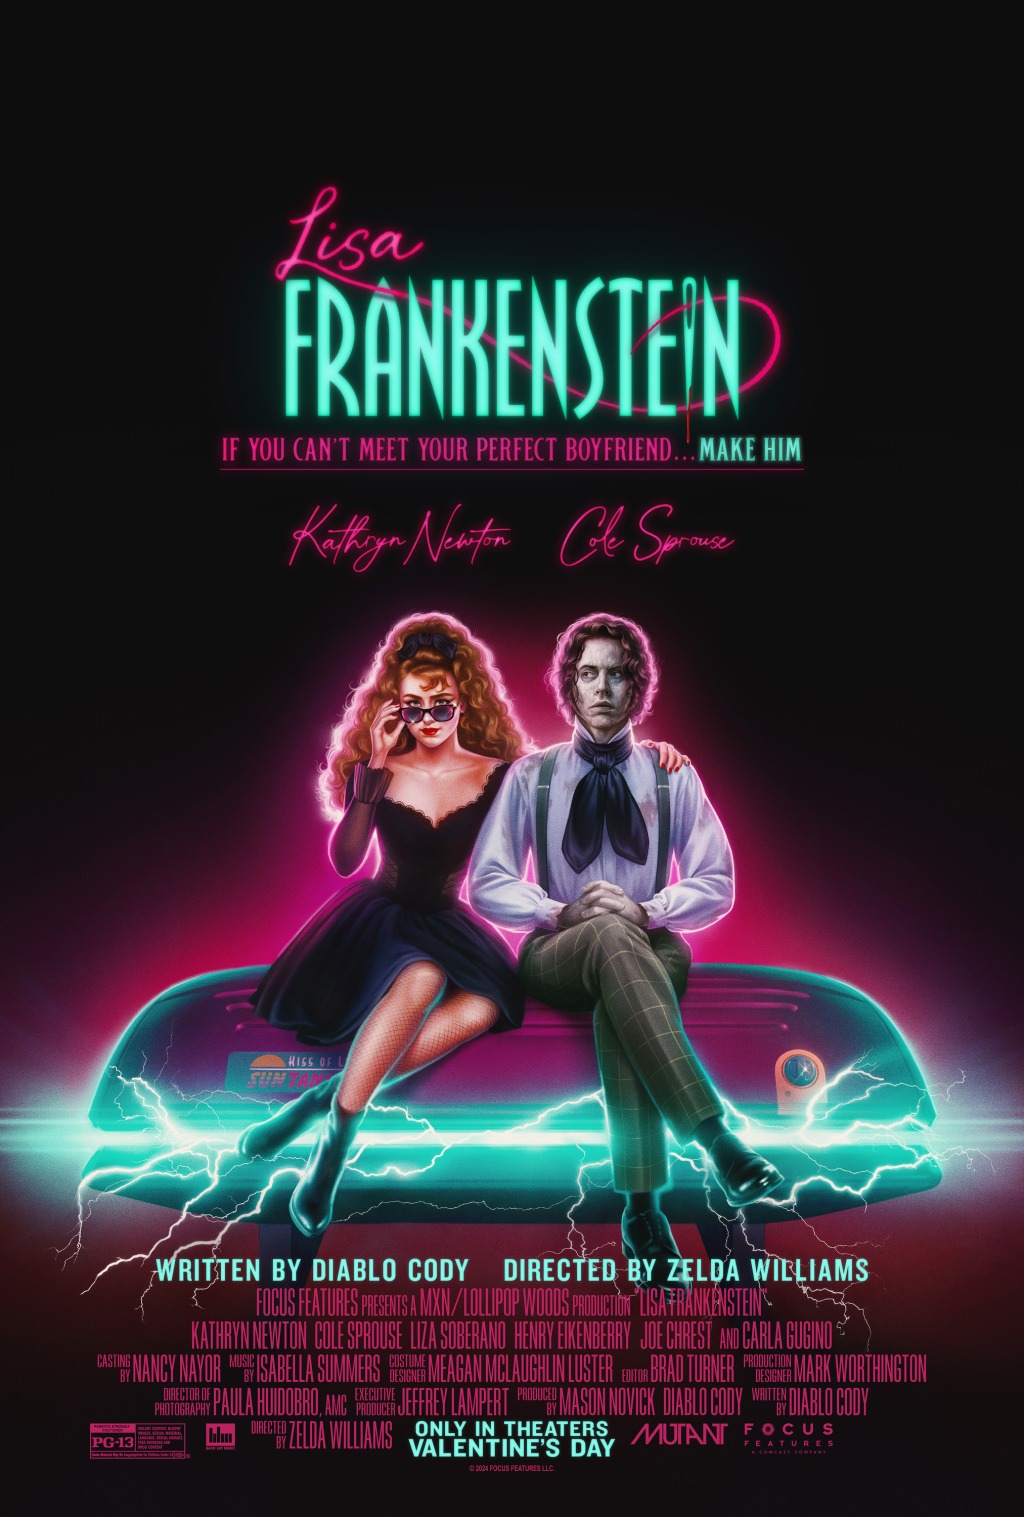 Lisa Frankenstein Review — Unapologetically unserious and hilarious